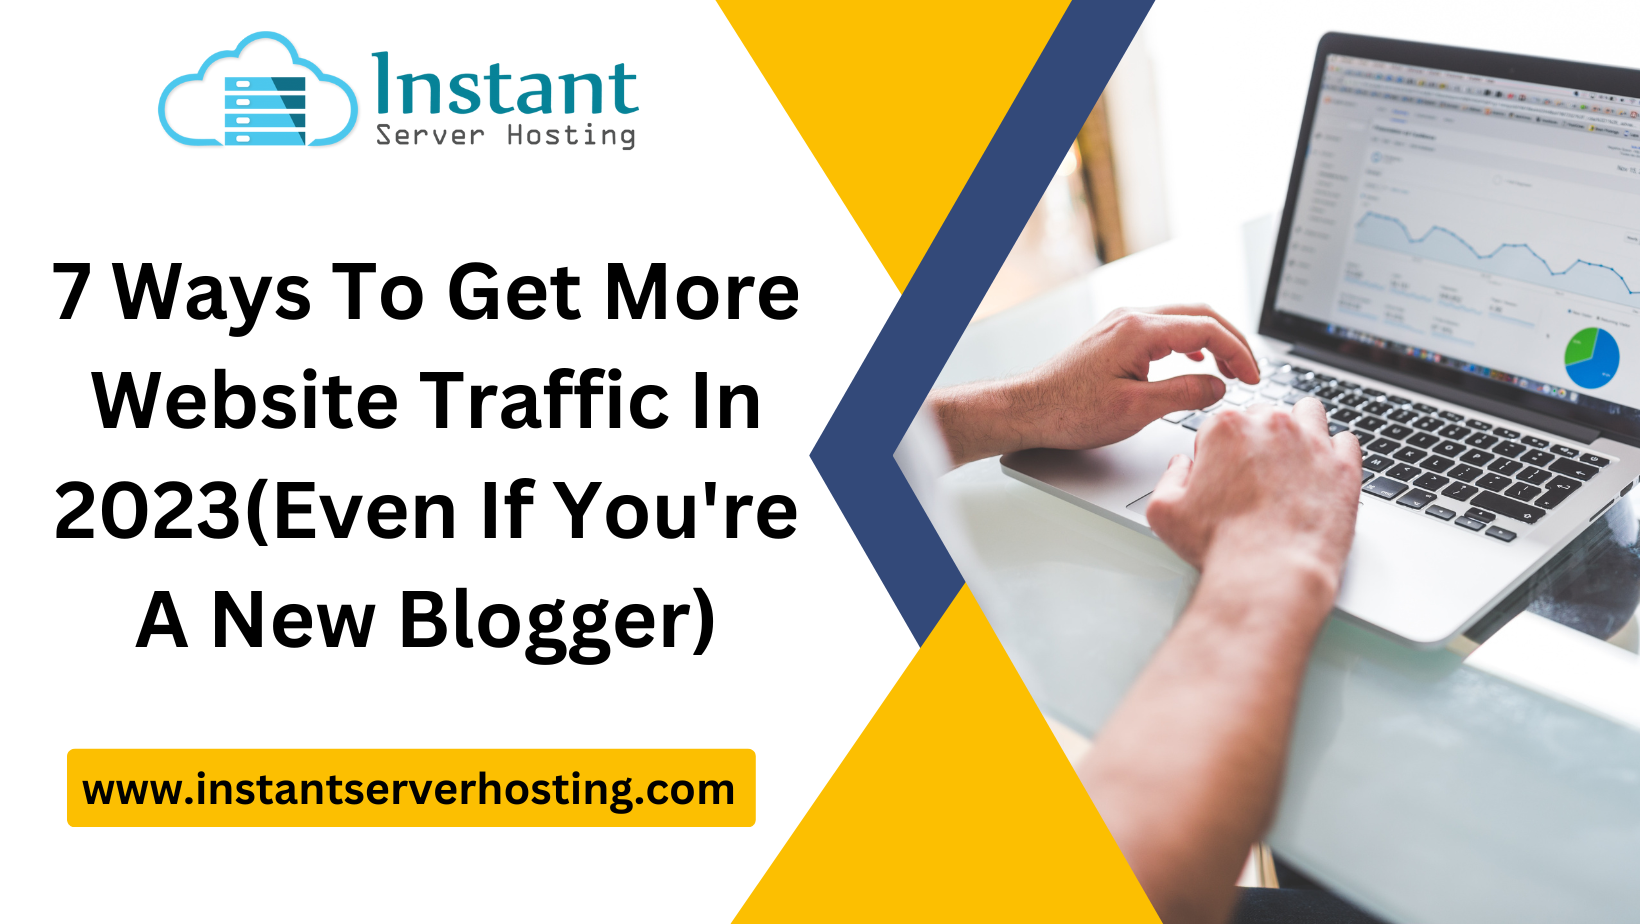 7 Ways To Get More Website Traffic In 2023(Even If You're A New Blogger)